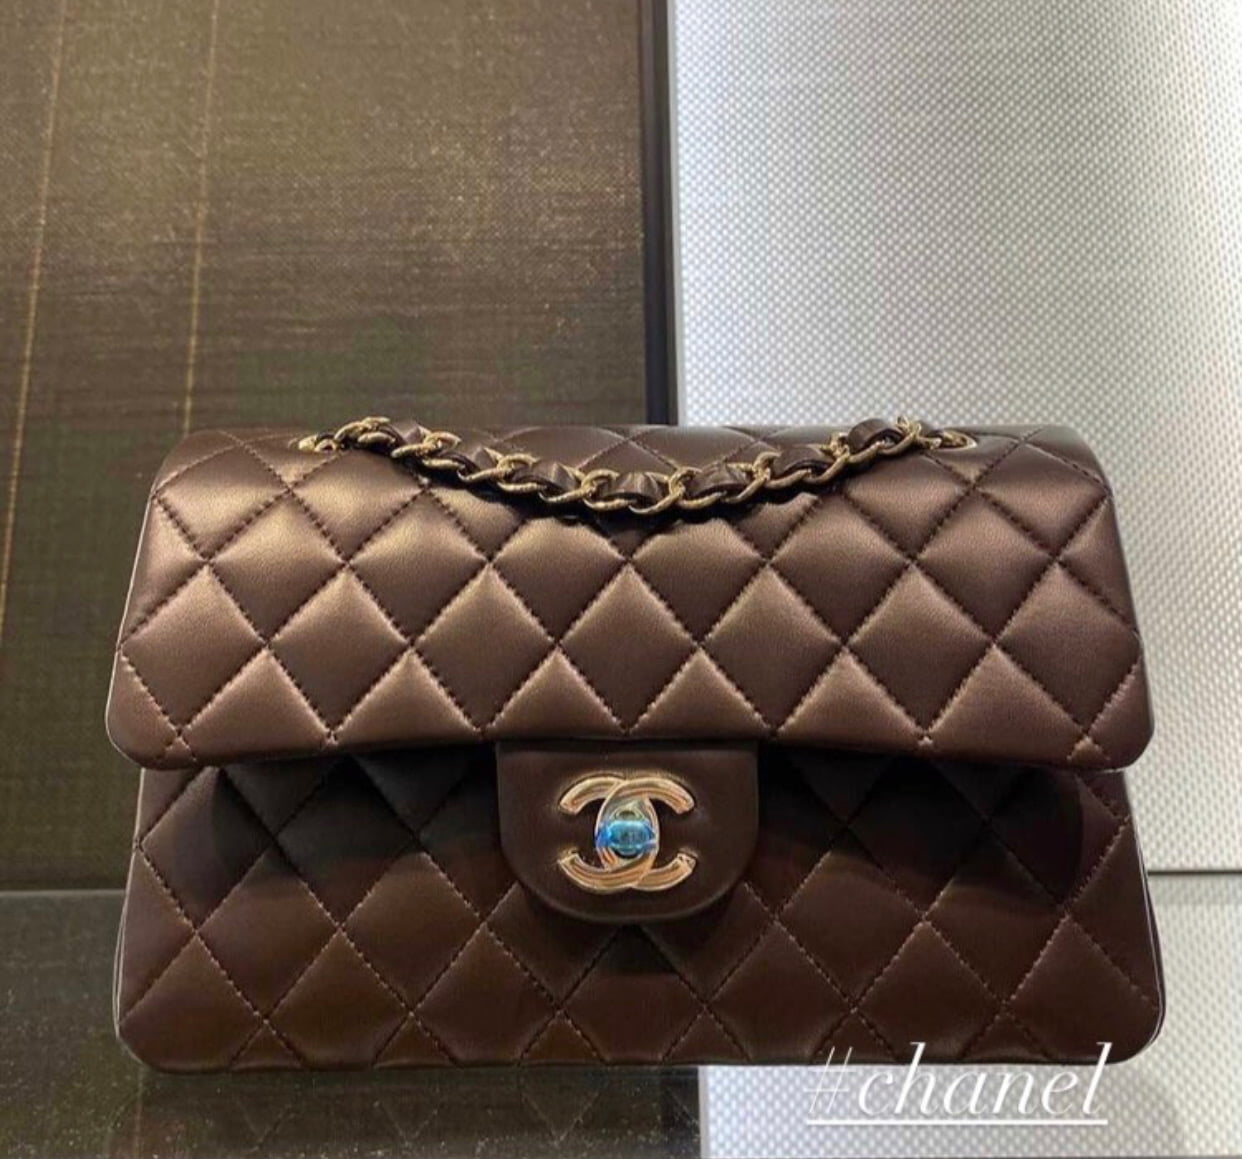 New Chanel Classic Flap Colors Coming for Fall 2021 - PurseBop